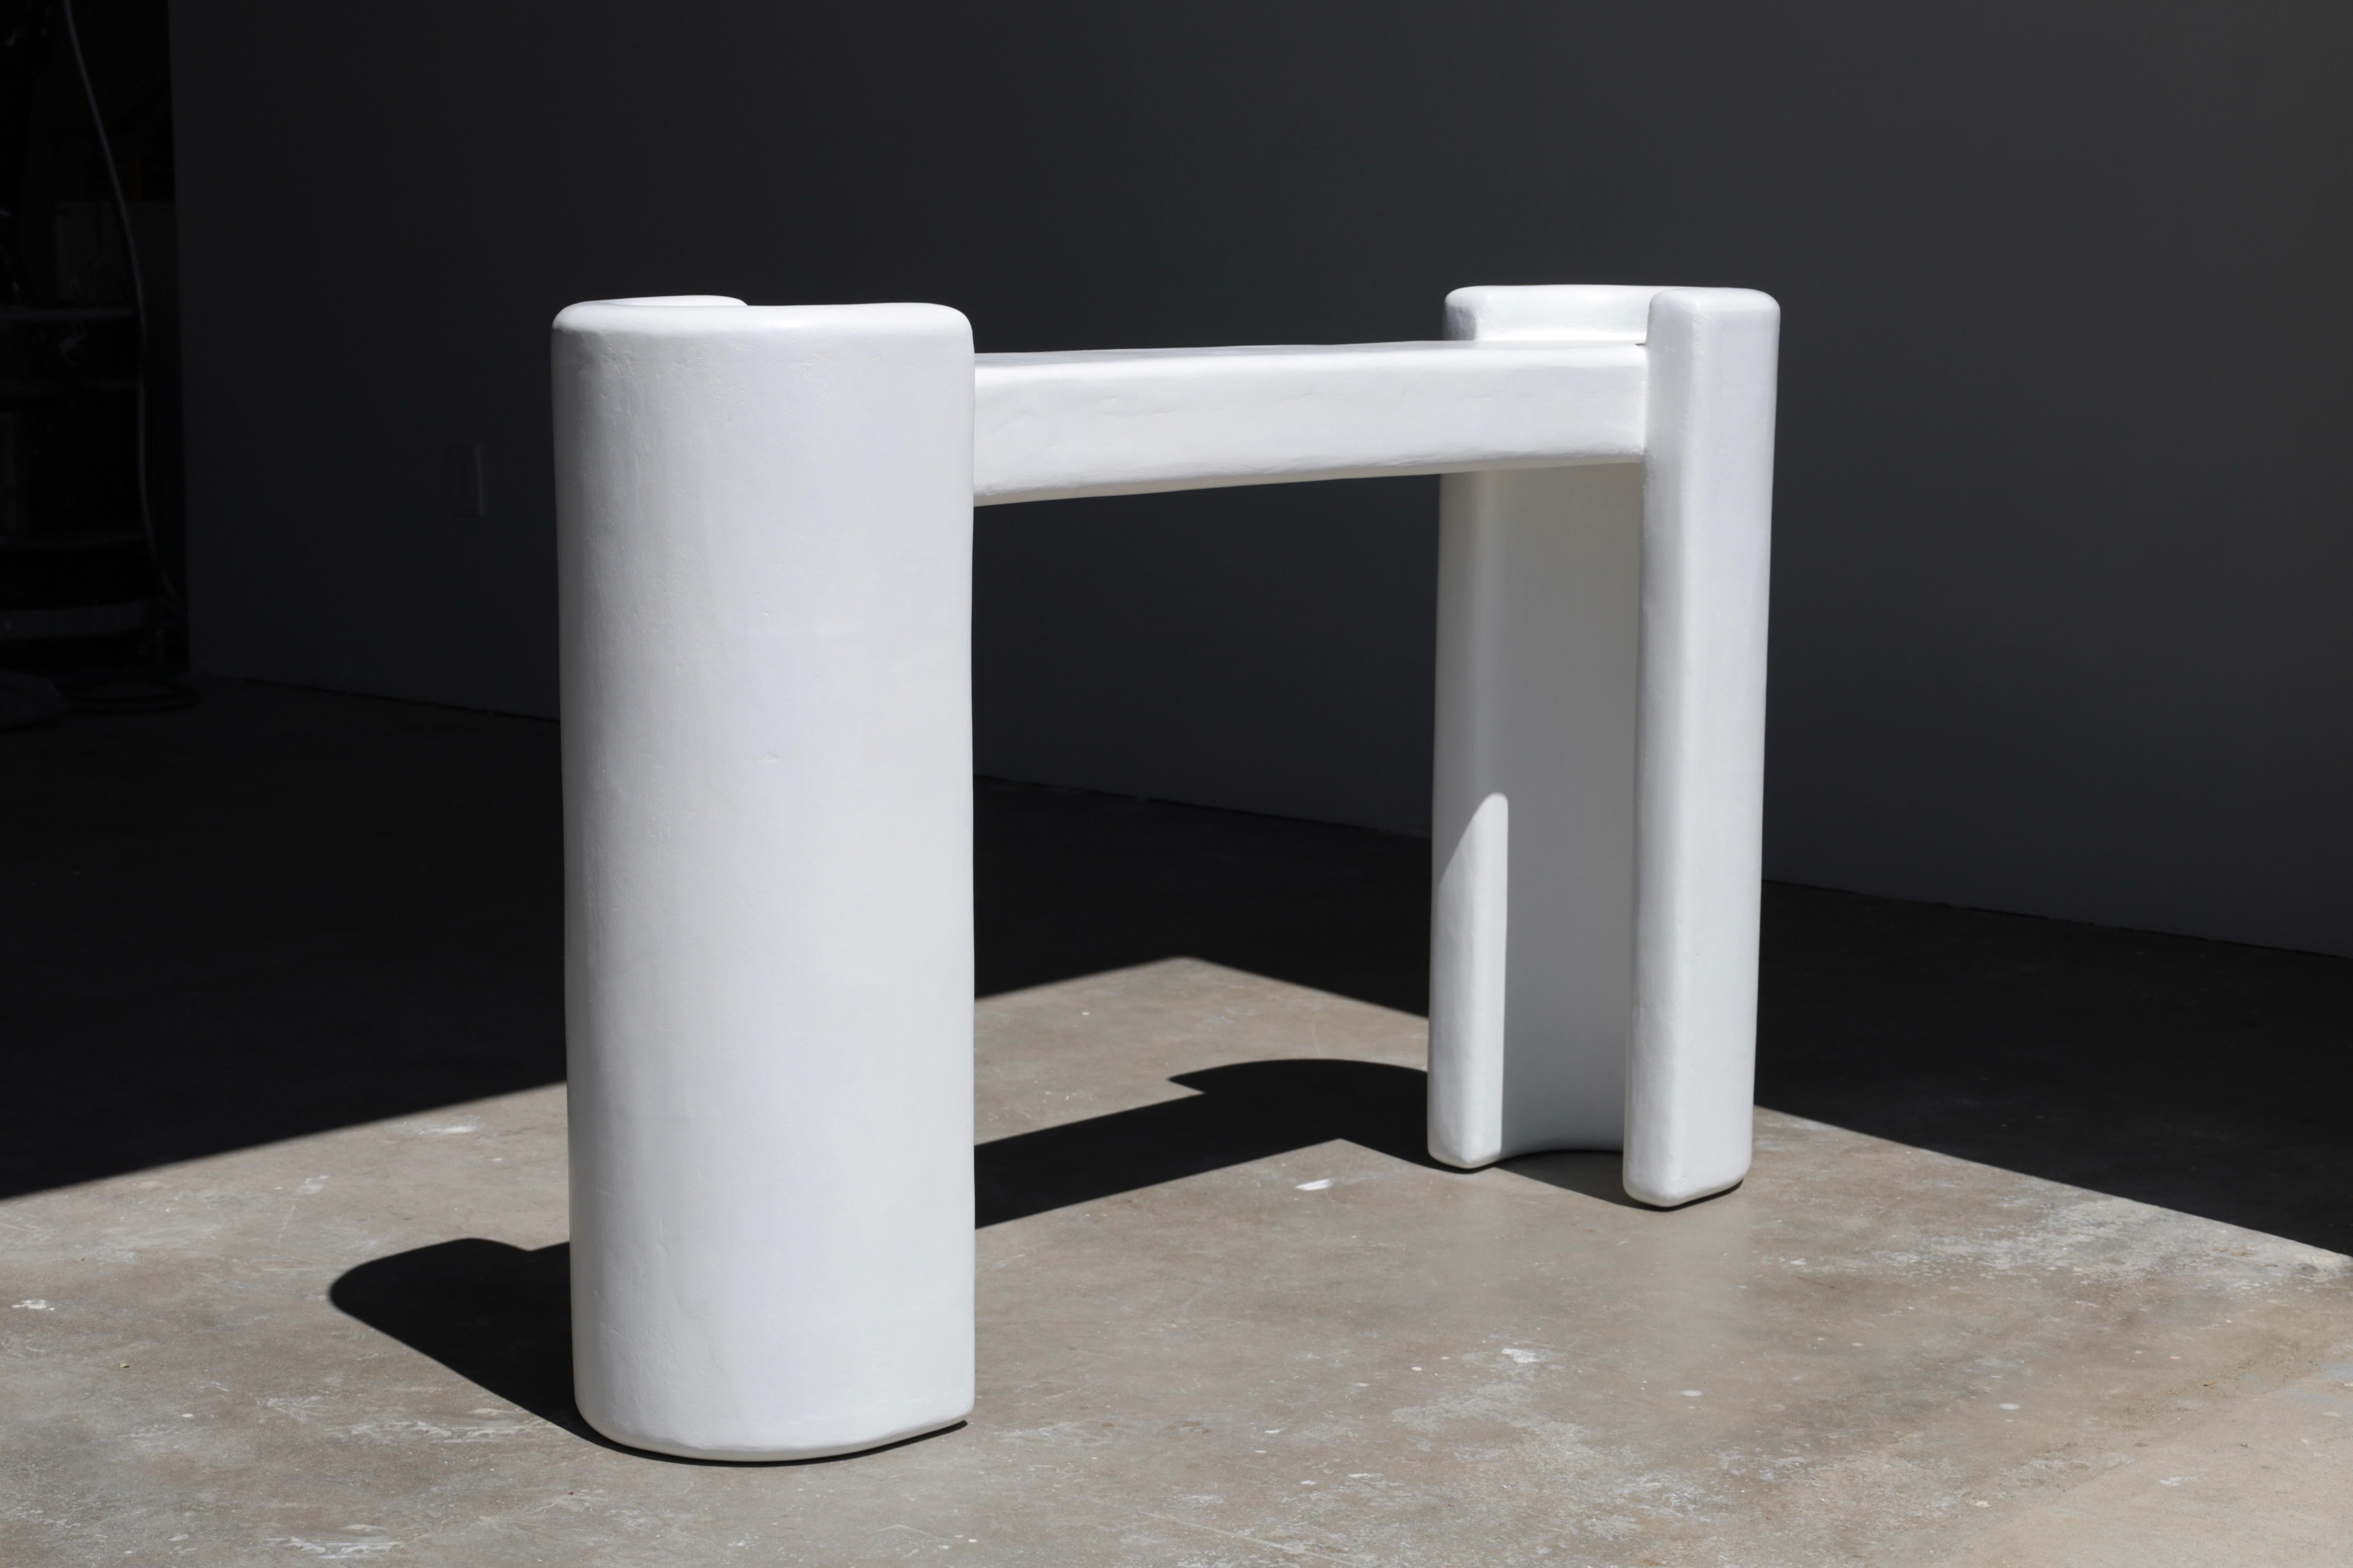 a very unique half moon console table in the style of art deco.

our product is one-of-a-kind. no two are exactly alike.
each öken house studio piece is handmade & made to order by a small team of plaster artisans.

we use an authentic three coat